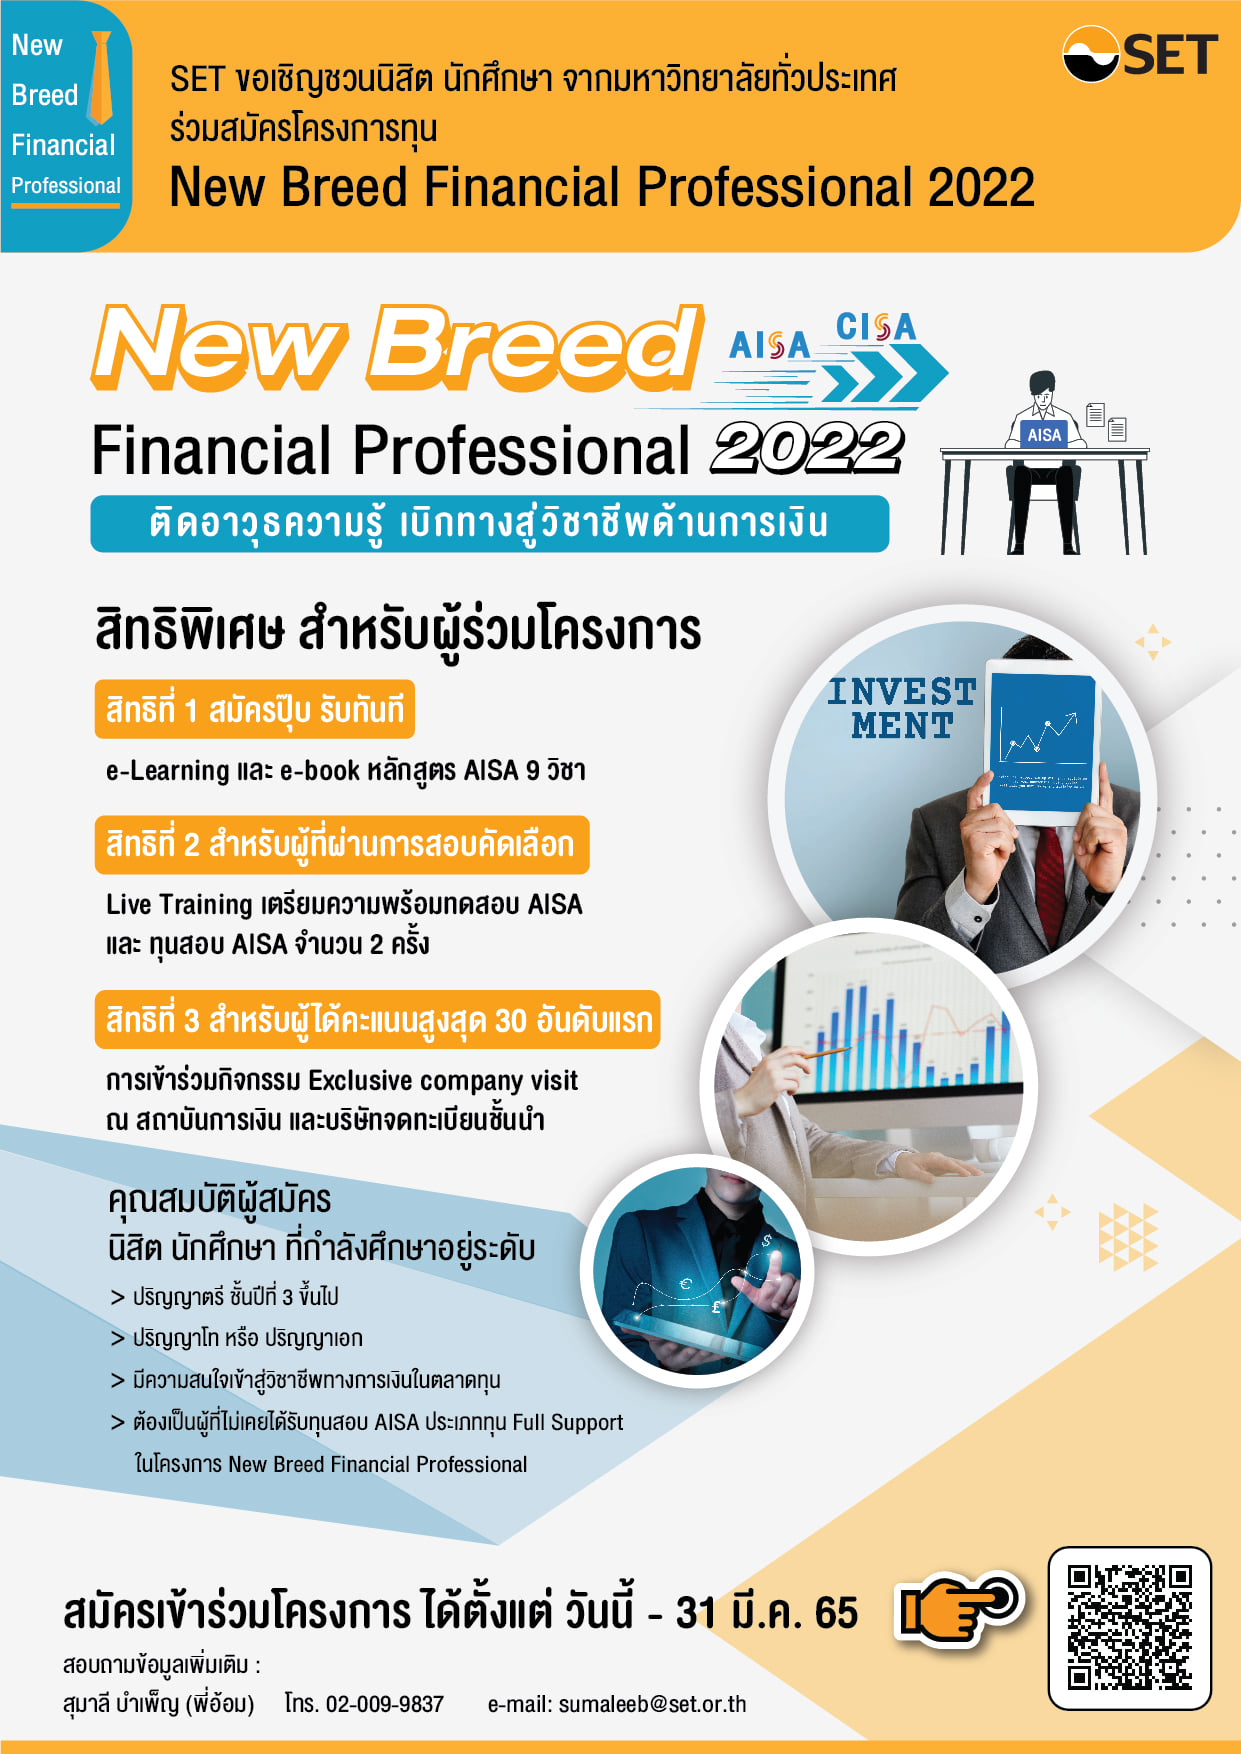 New Breed Financial Professional 2022